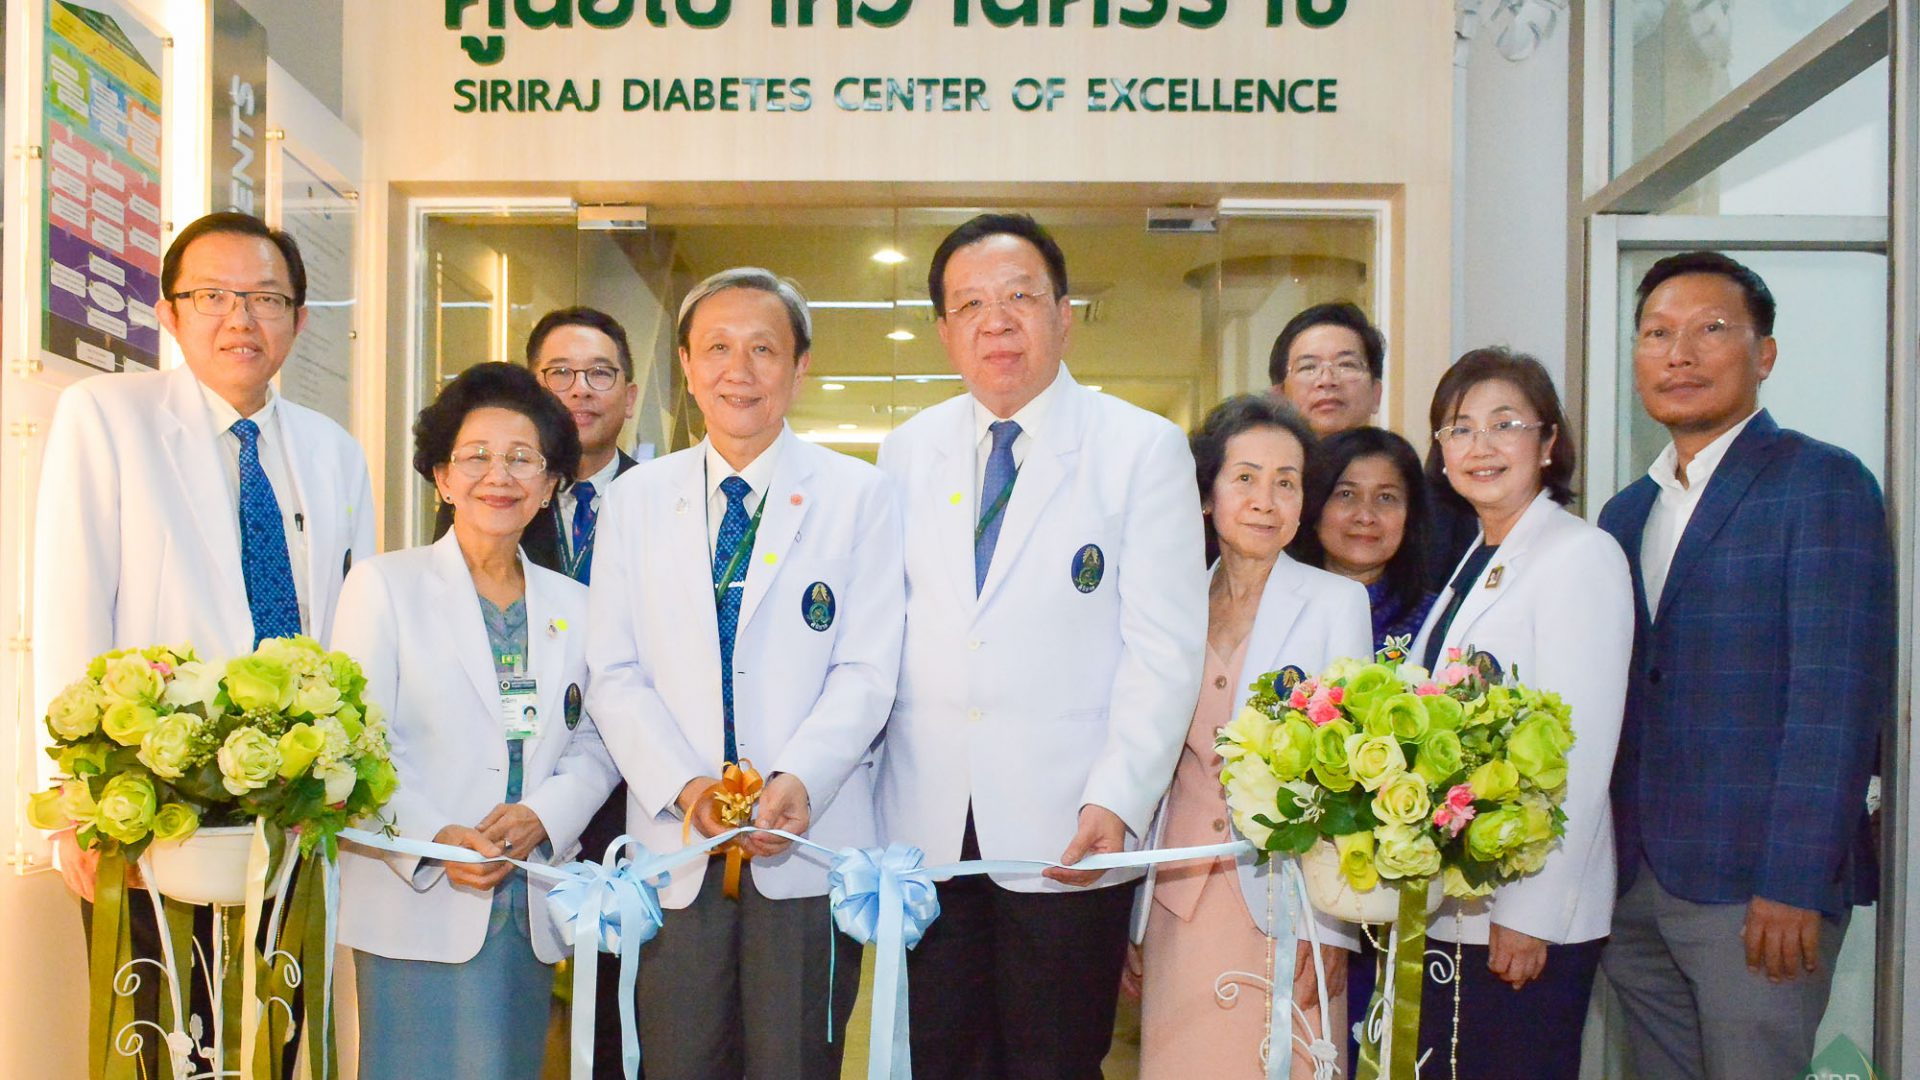 The Grand Opening of “Siriraj Diabetes Center of Excellence”